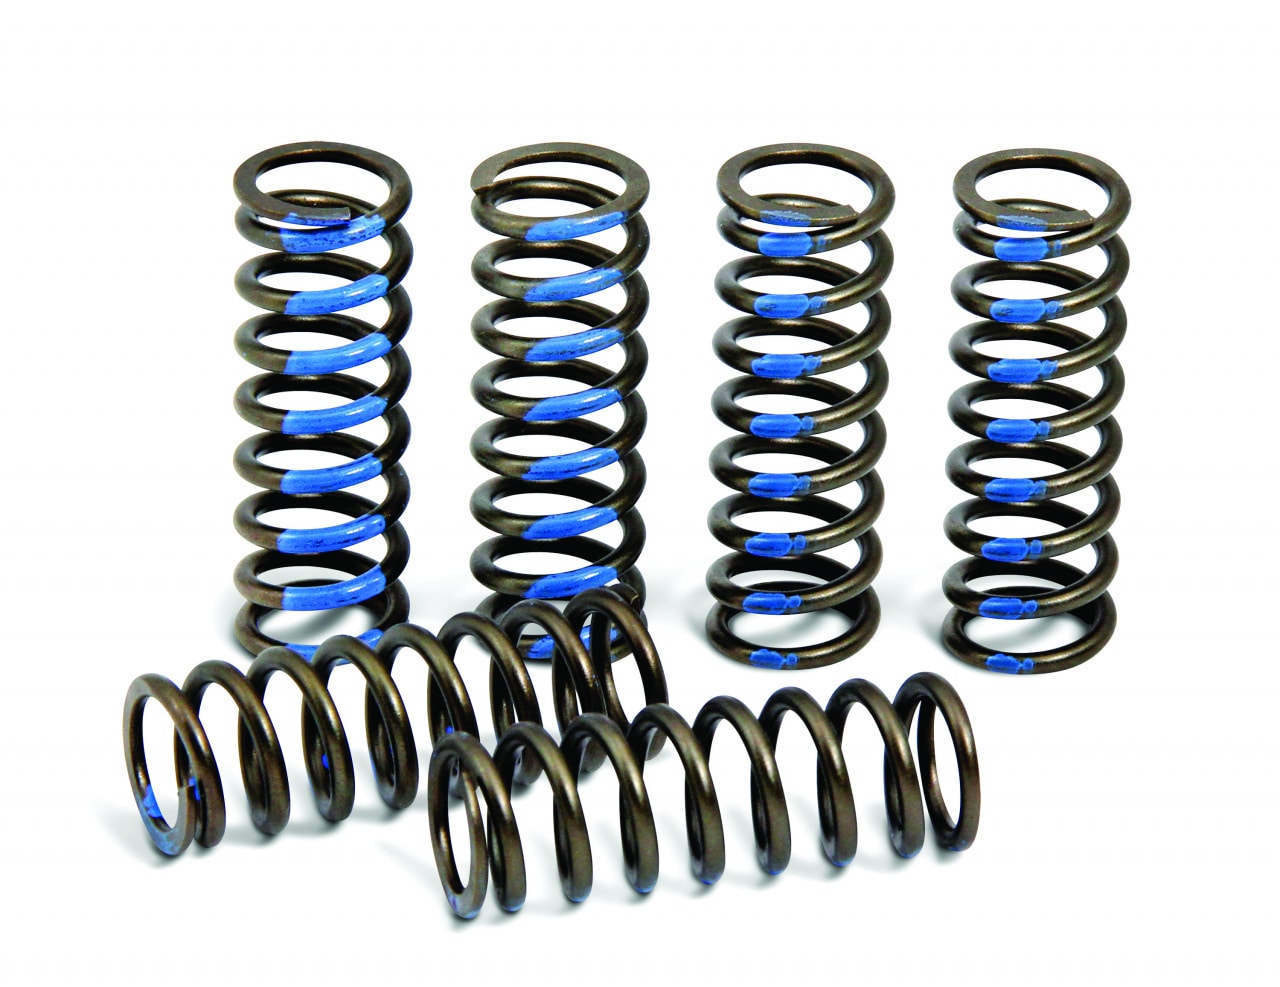 Pro Circuit Yz250f clutch Springs Hit Parade2